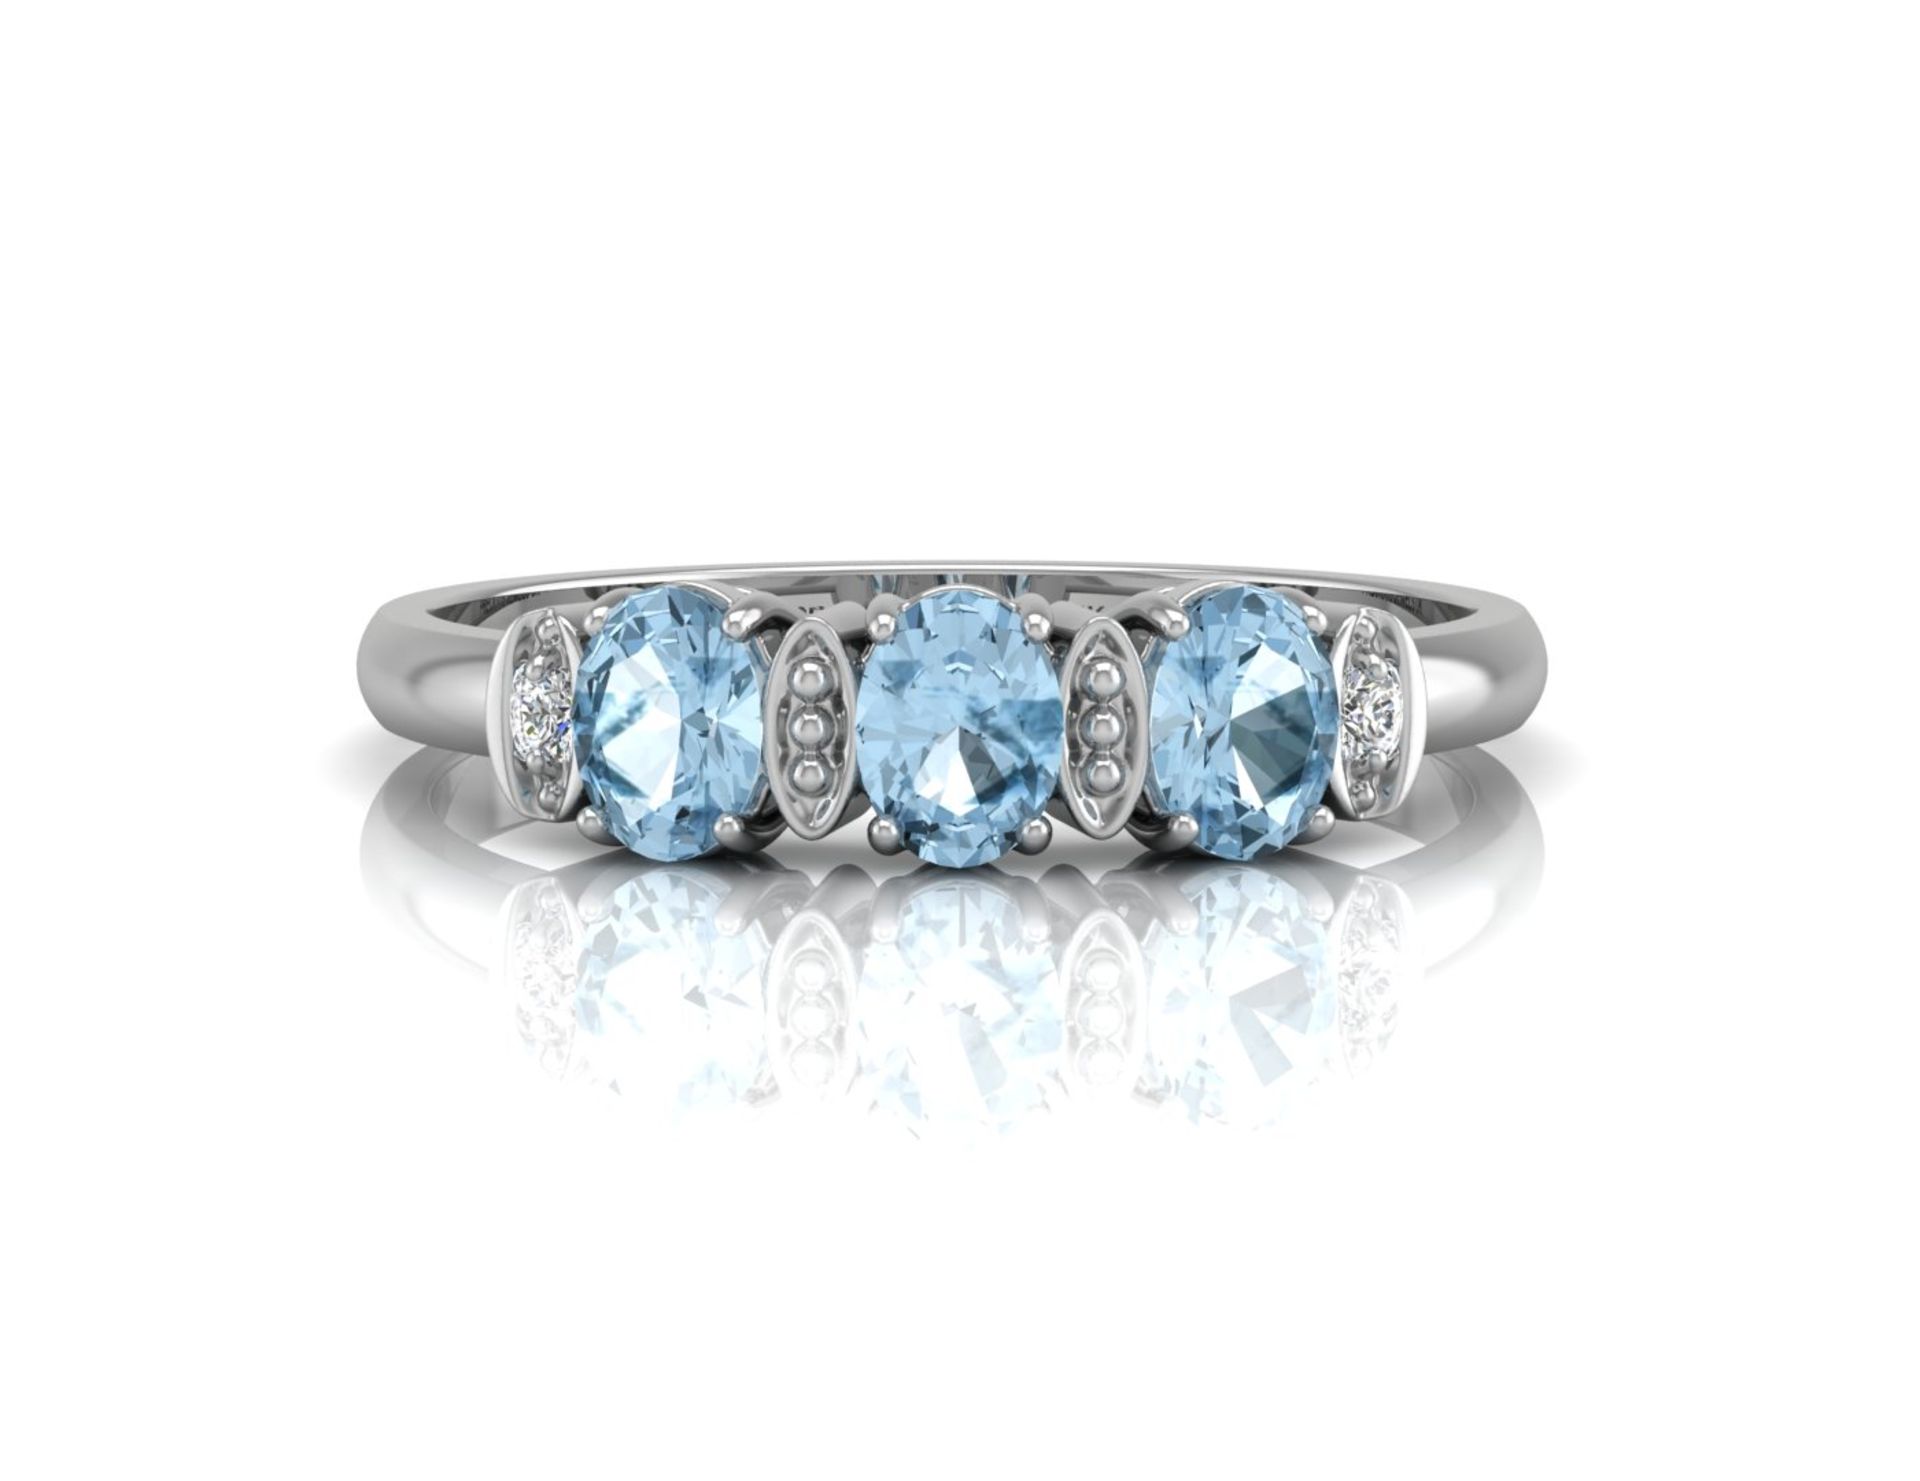 9ct White Gold Semi Eternity Diamond and Blue Topaz Ring (BT0.63) 0.01 Carats - Image 4 of 5